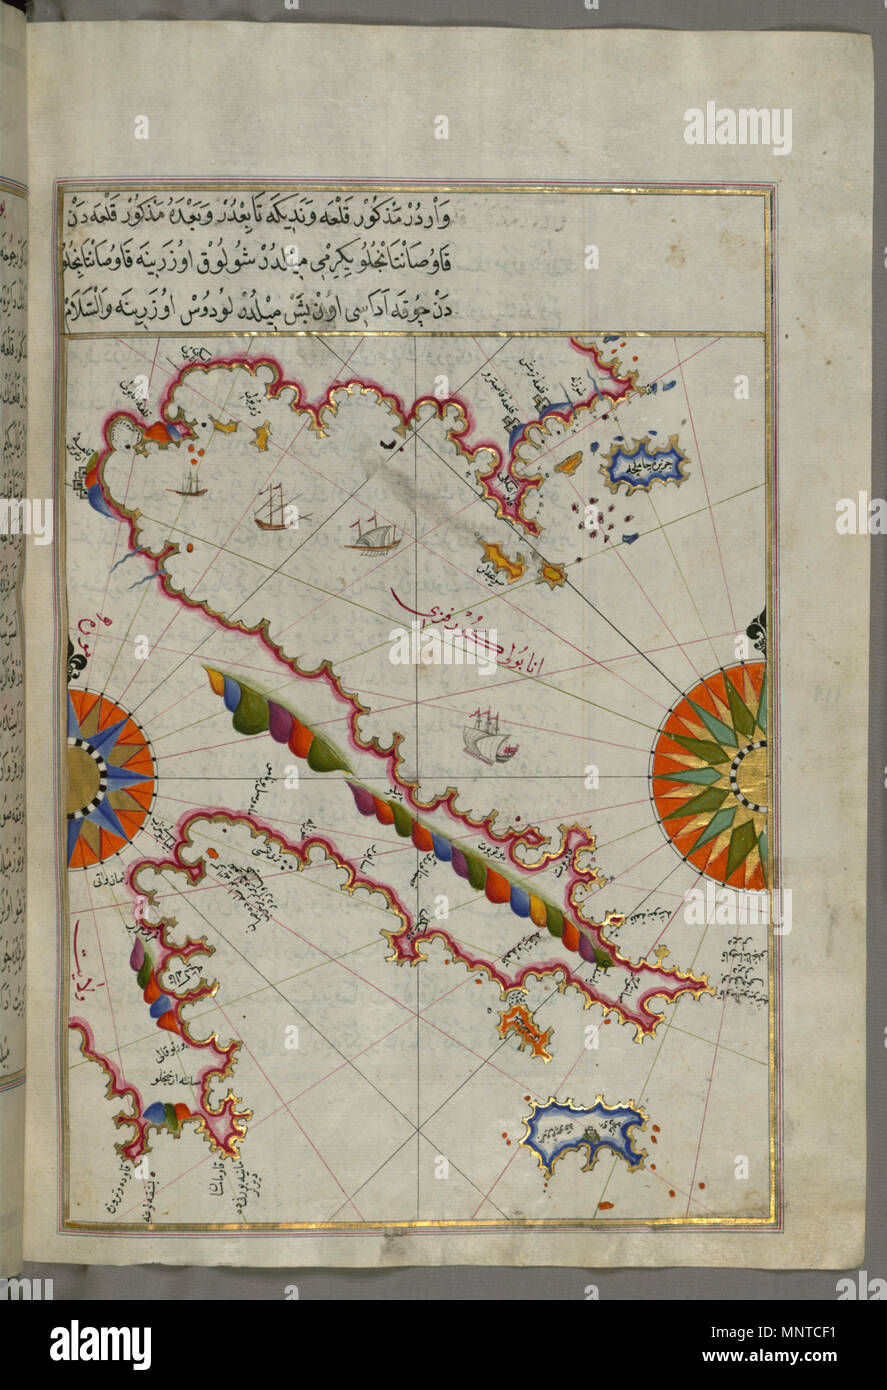 Piri Reis (Turkish, 1465-1555). 'Leaf from Book on Navigation,' 17th-18th century. ink, paint, and gold on paper. Walters Art Museum (W.658.123B): Acquired by Henry Walters. W.658.123b 1003 Piri Reis - Map of Argolikos Bay and Peloponnese Peninsula - Walters W658123B - Full Page Stock Photo